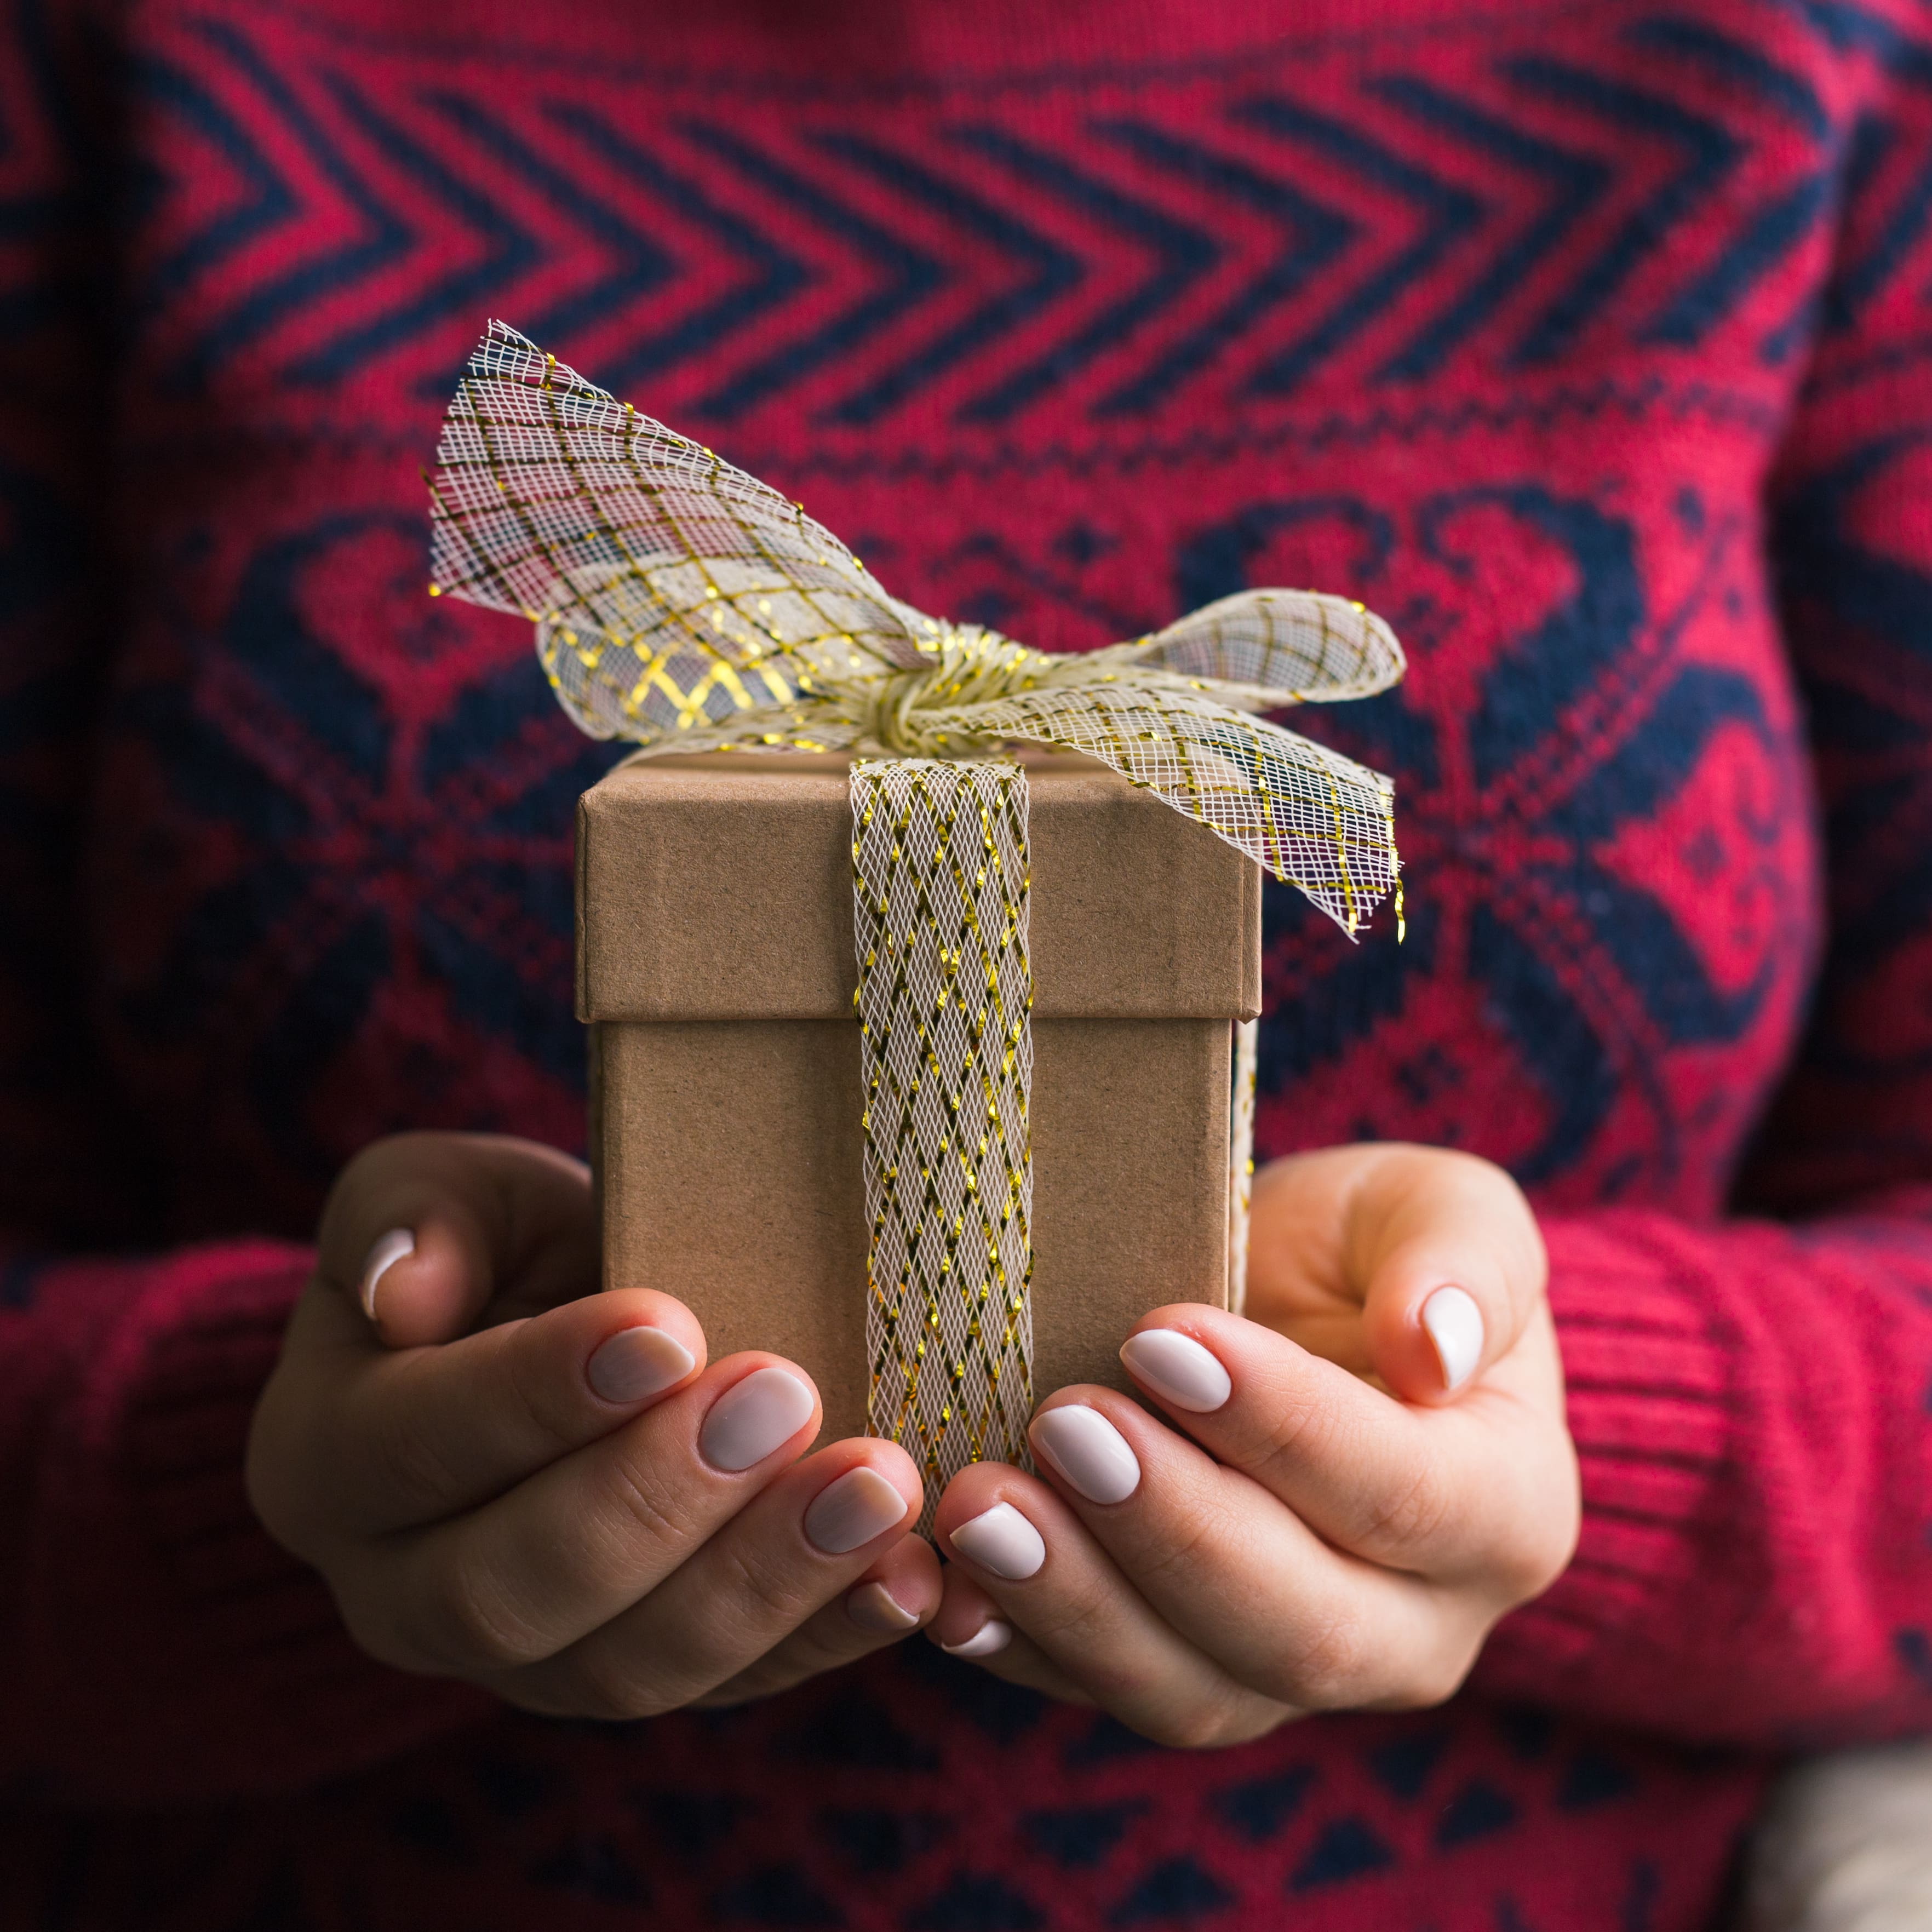 Give Yourself the Gift of Health This Christmas